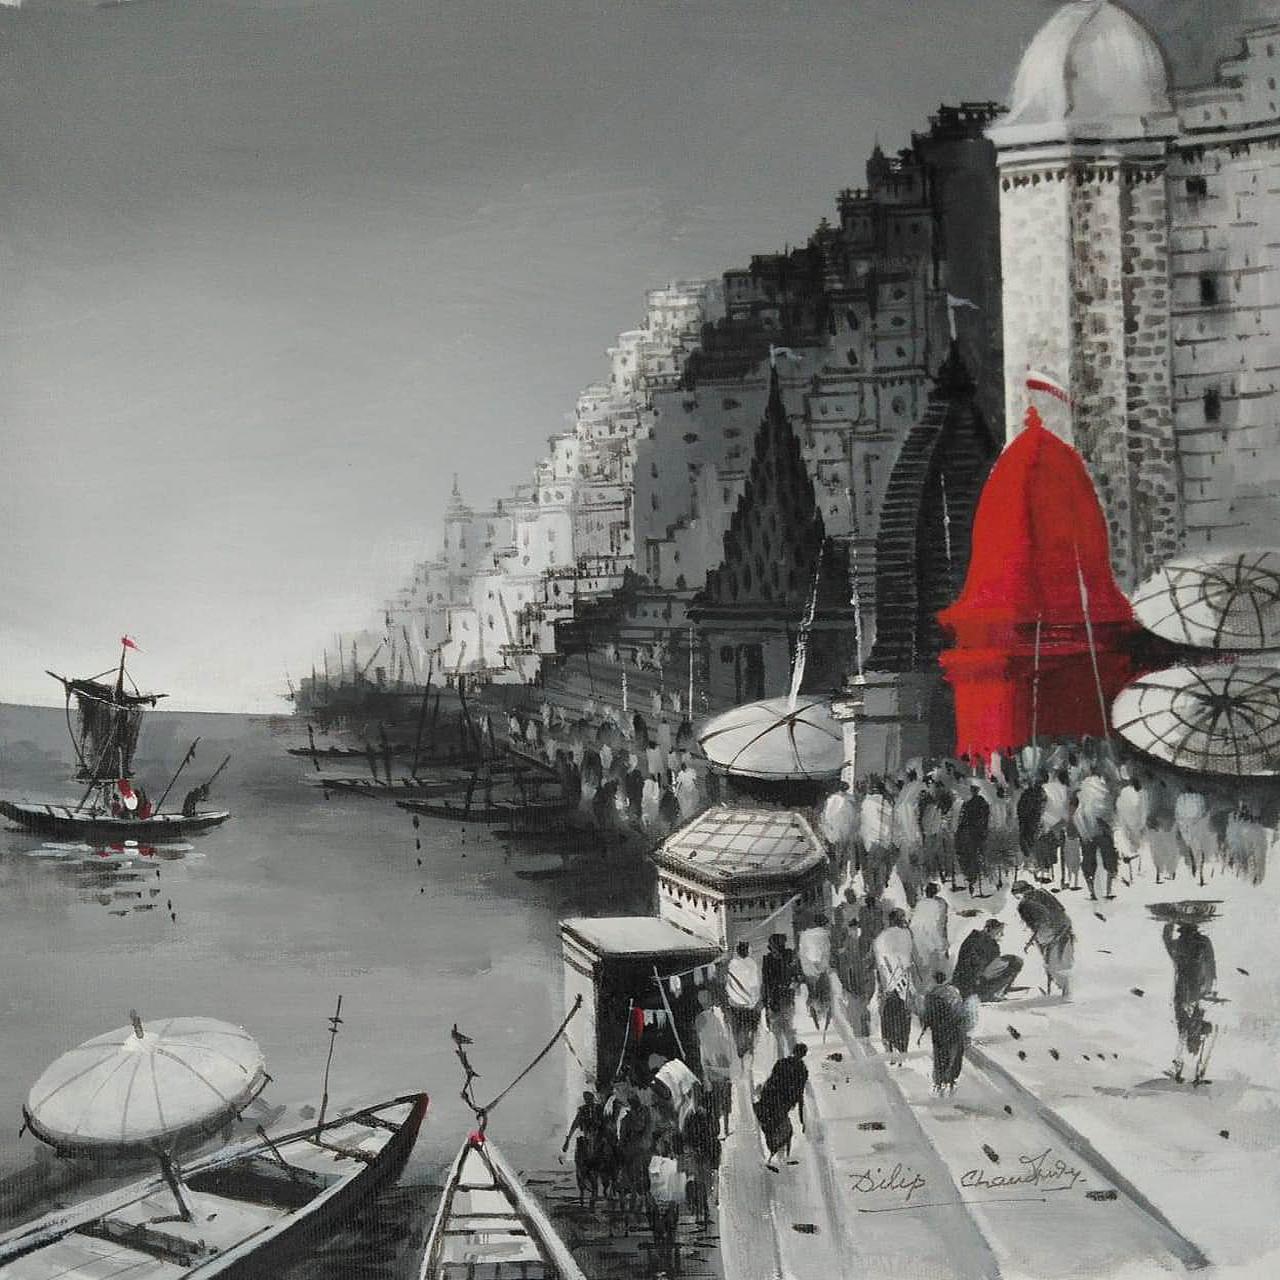 Dilip Chaudhury Interior Painting - Benaras, Acrylic on Canvas by Contemporary Indian Artist "In Stock"